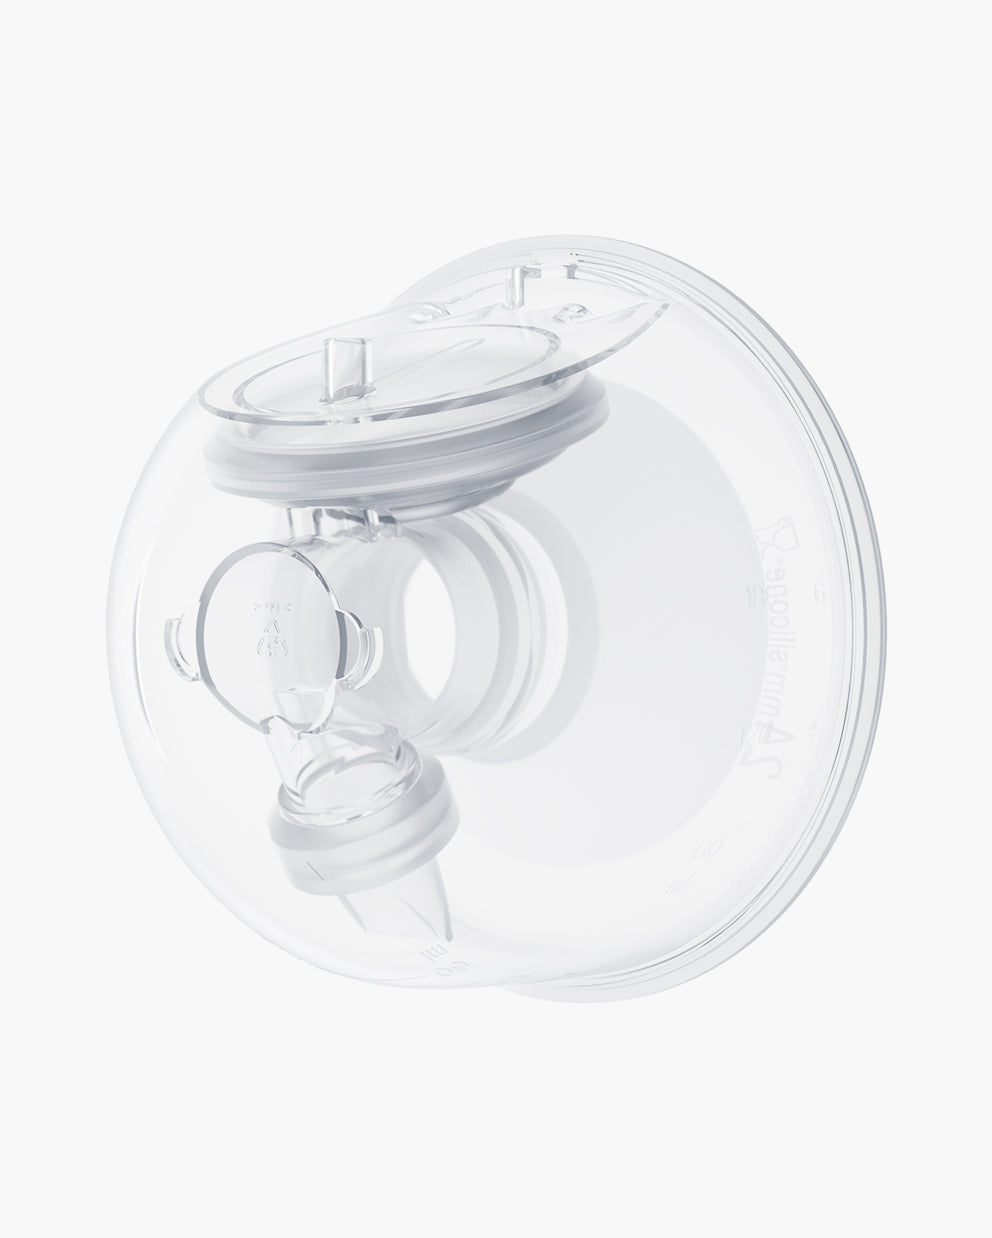 S9 Pro Breast Pump Replacement Parts